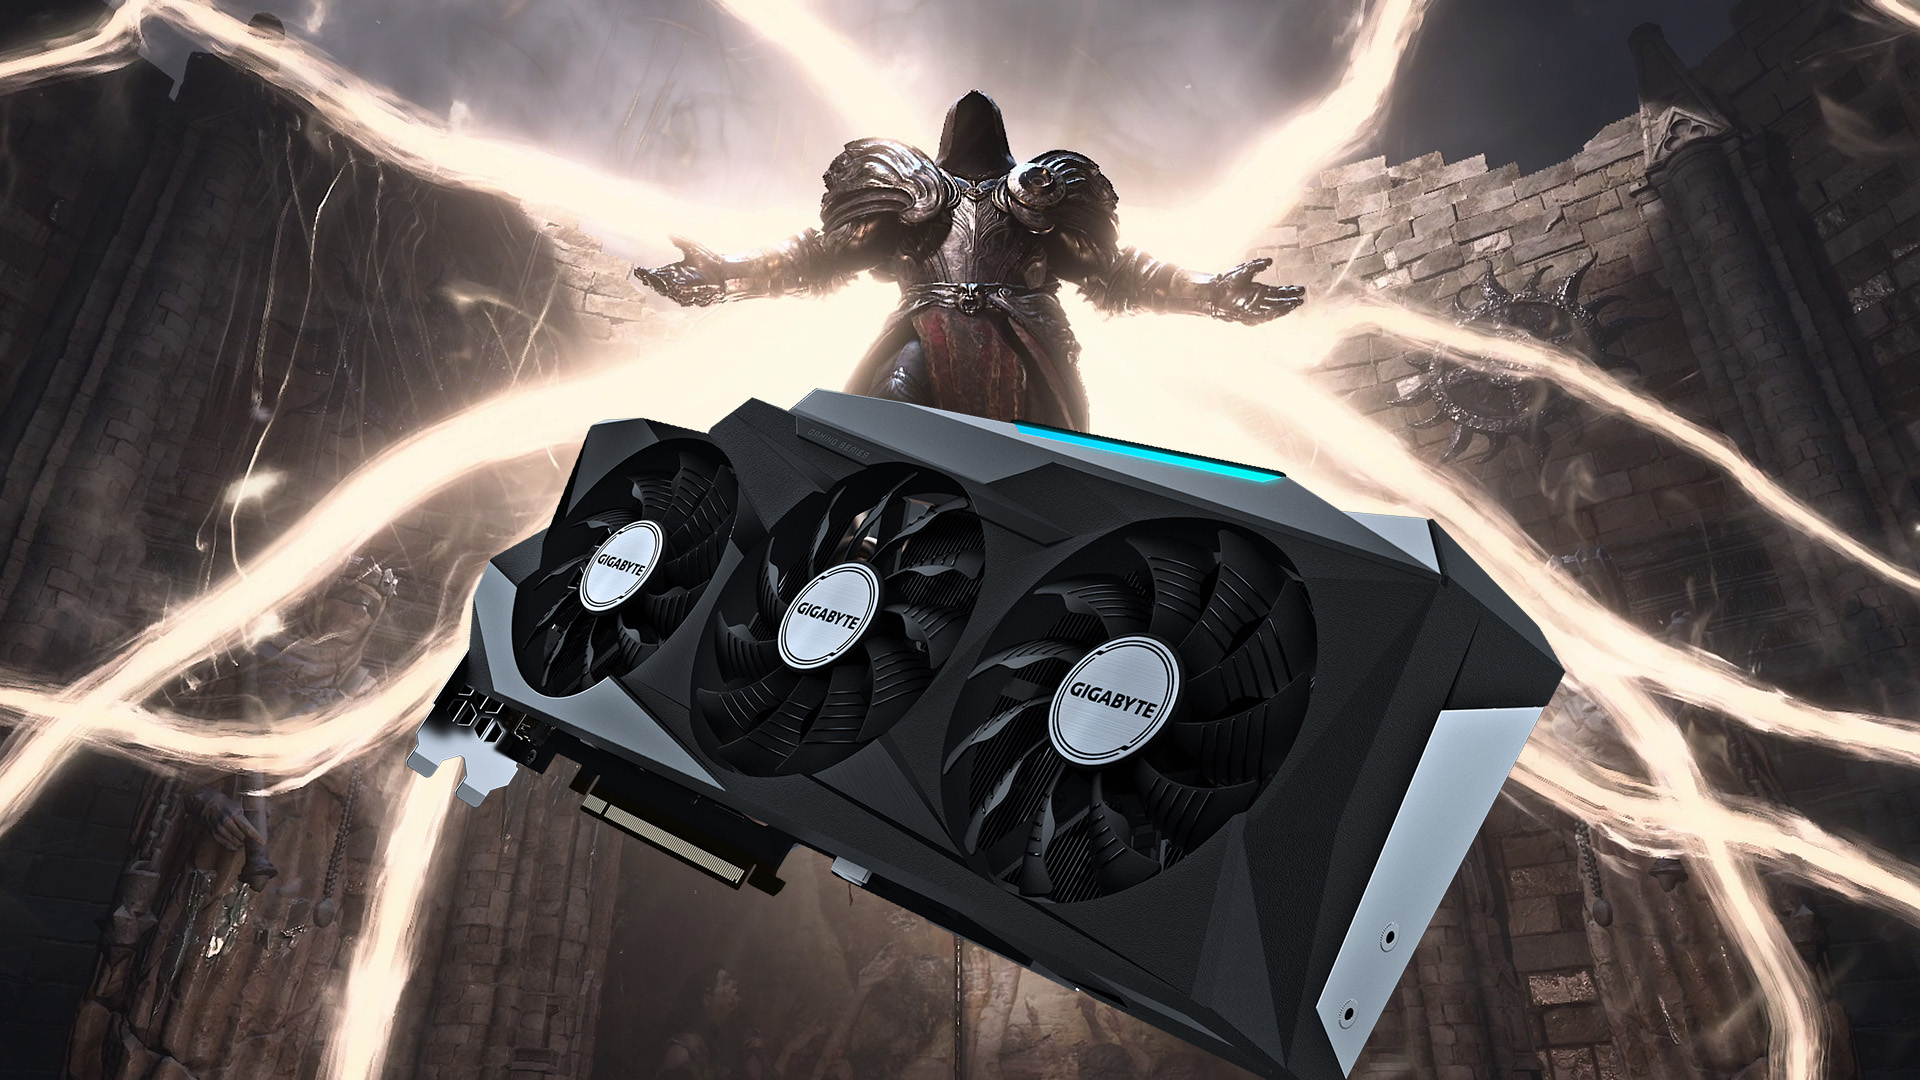  Diablo 4 is reportedly killing some RTX 3080 Ti graphics cards 